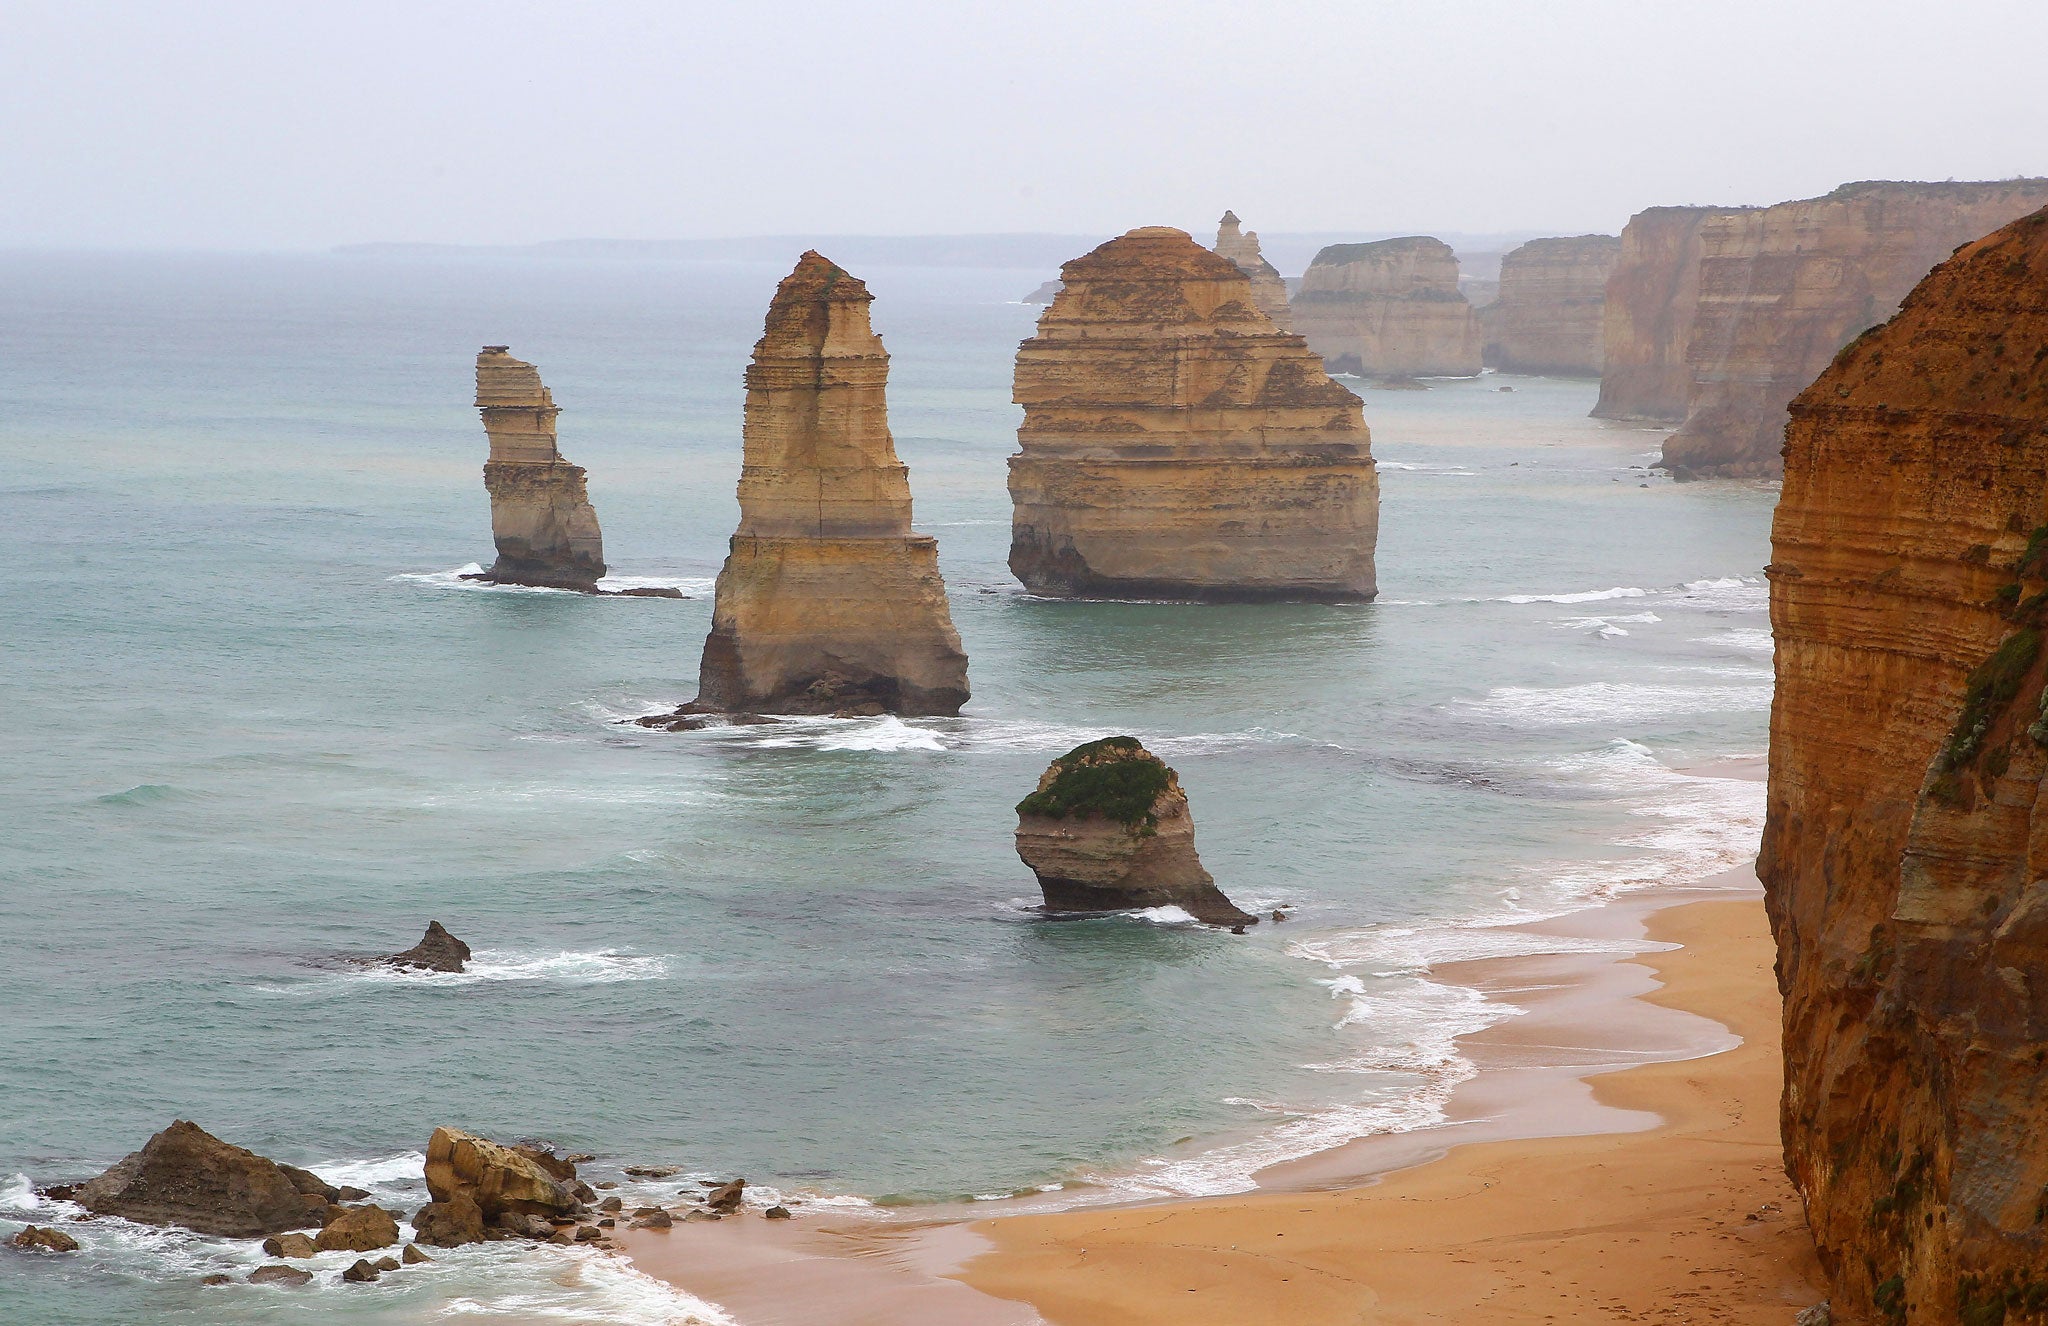 The 12 Apostles, a collection of limestone stacks off the shore of Port Campbell National Park, are evidence of immense forces